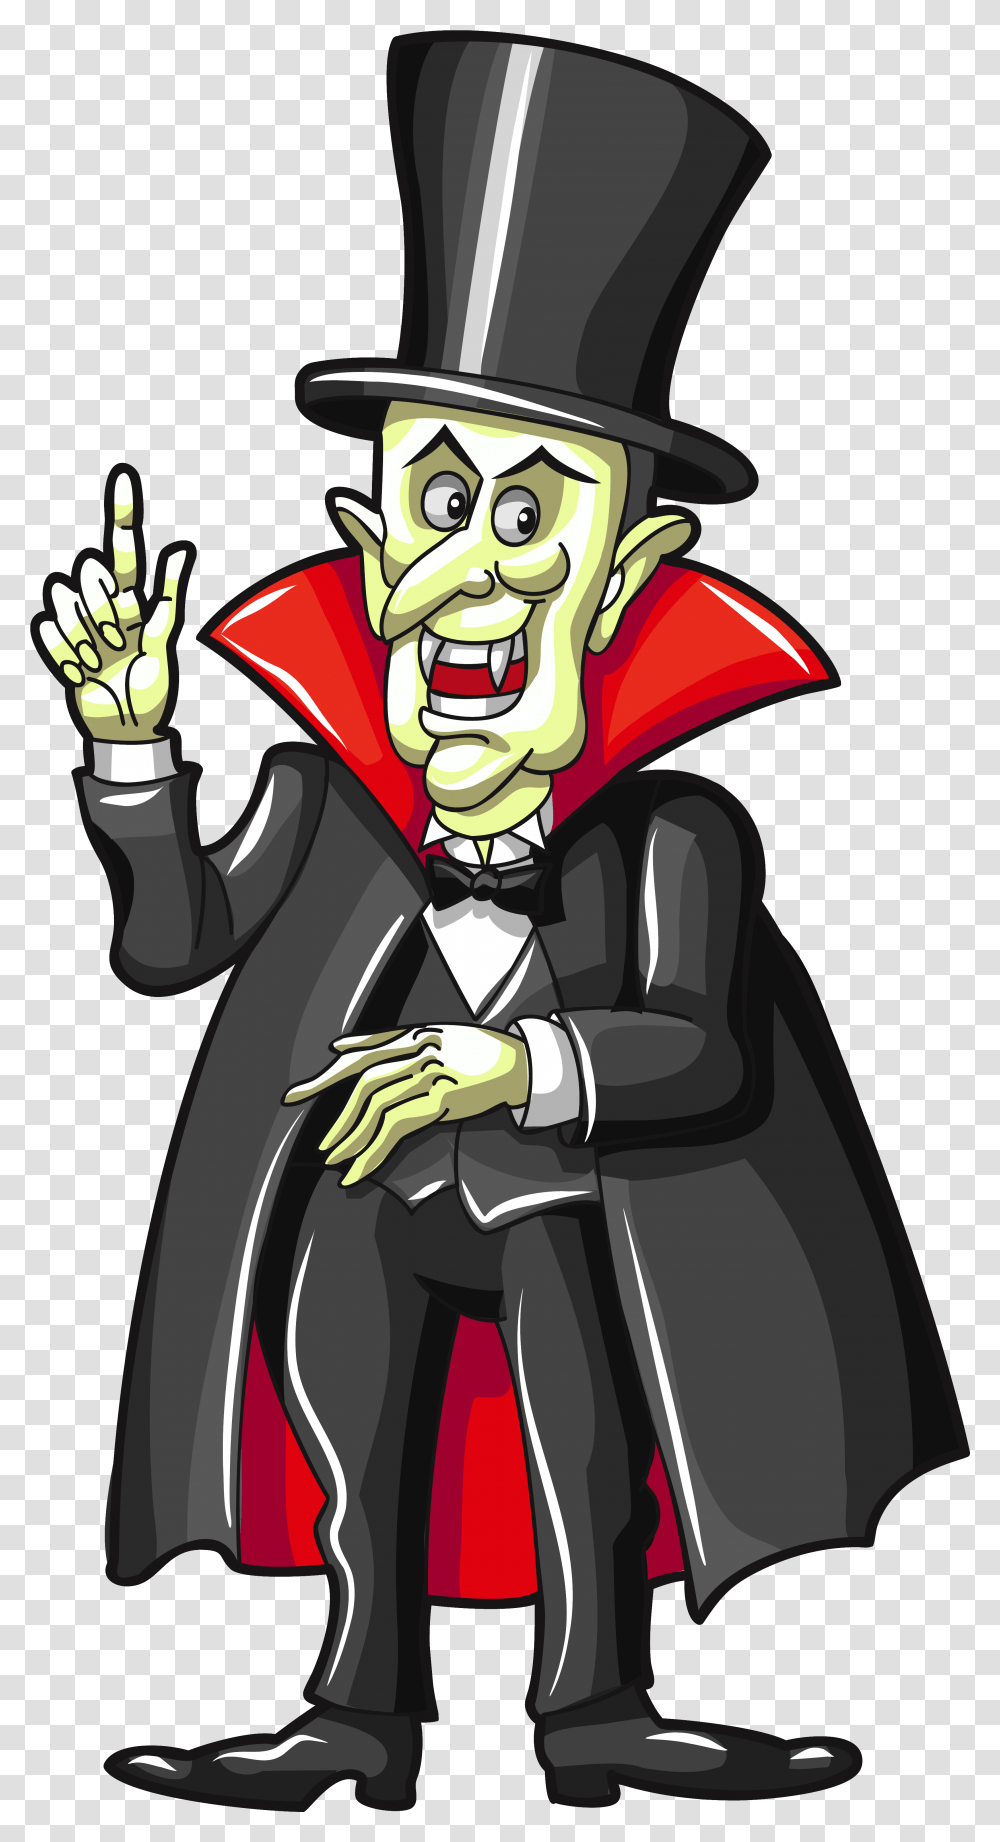 Haunted Image Gallery Background Vampire Clipart, Performer, Magician Transparent Png